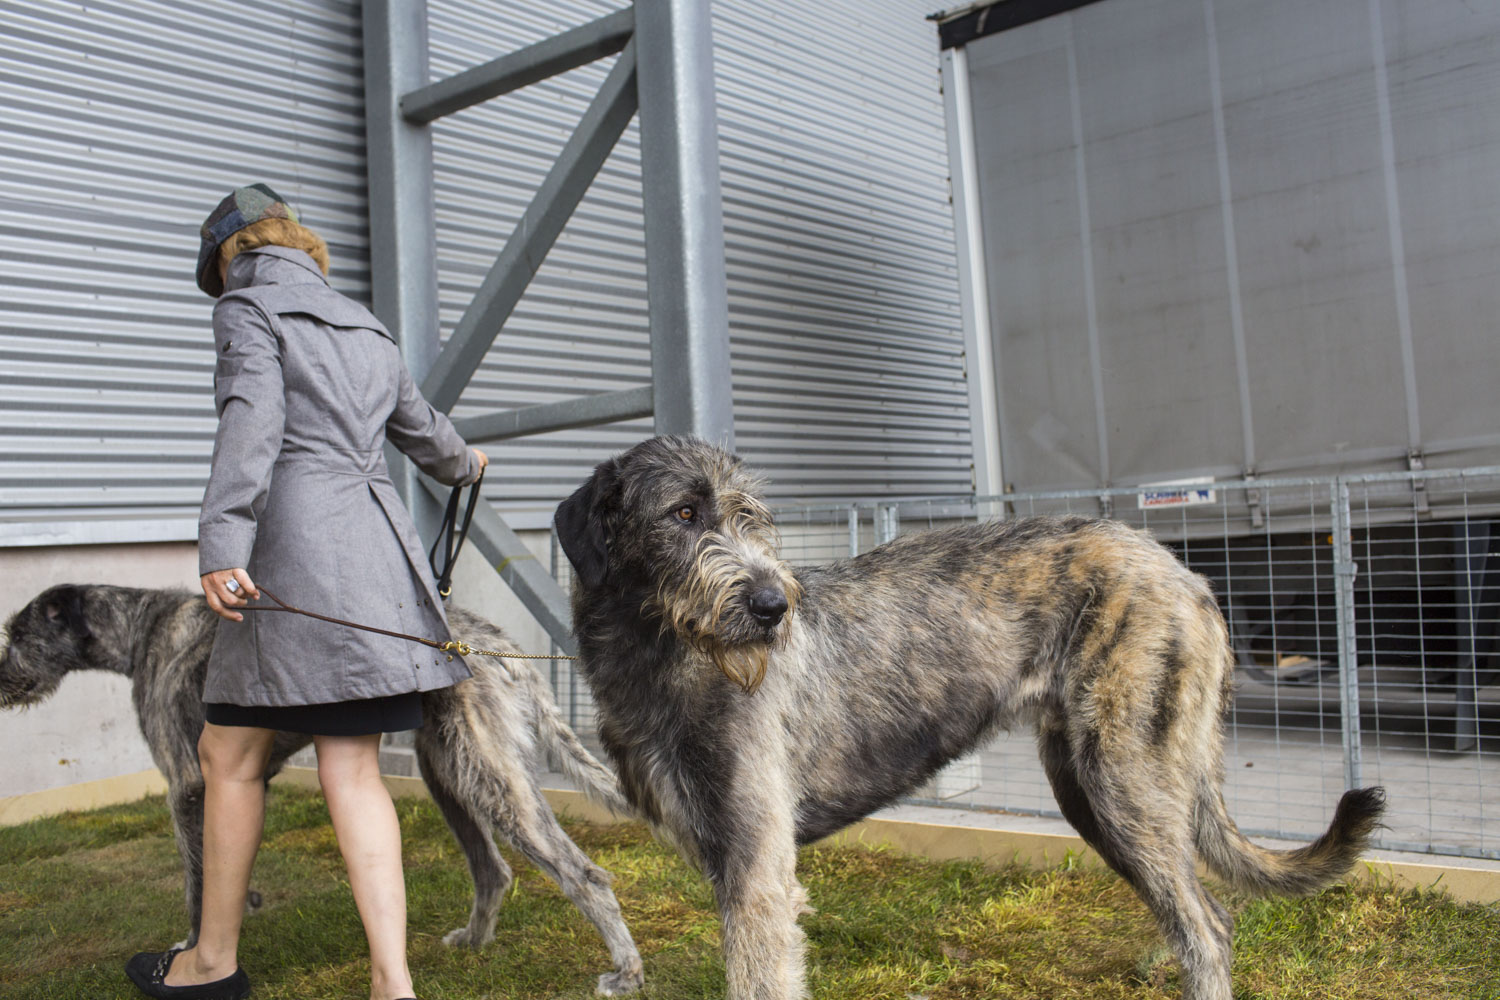 HELSINKI, FINLAND - AUG 9:  Apple, as in "apple of my eye," an Irish Wolfhound, looks over his shoulder as his owner, Gosewien van Klaarbergen, of the Netherlands, leads her other wolfhound, Tokyo, outside of the 2014 World Dog Show on Saturday, August 9th, 2014, in Helsinki, Finland. (Photo by Landon Nordeman)